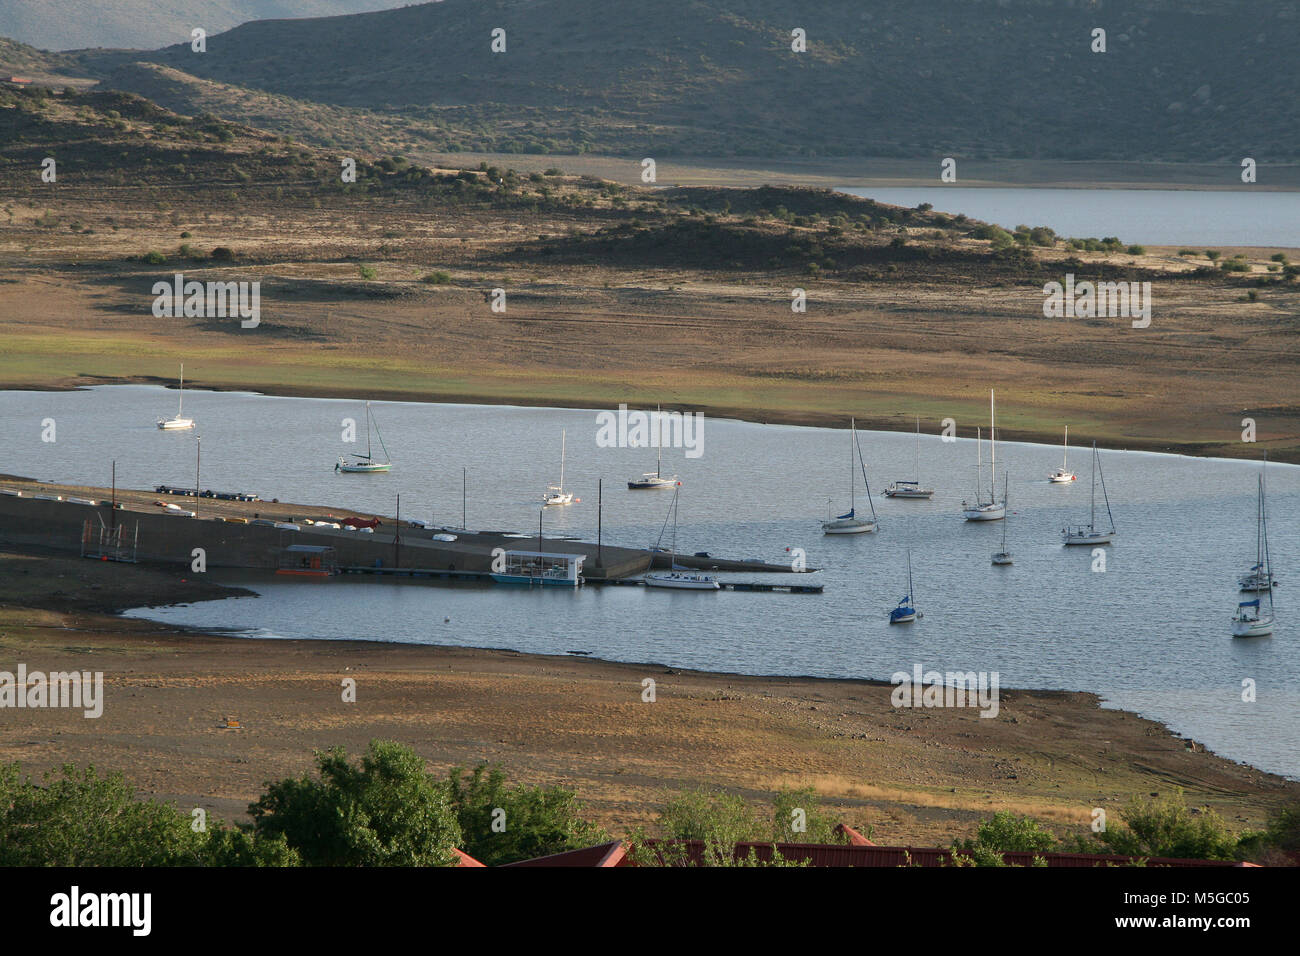 Gariep Dam Harbor with water very low due to drought, South Africa Stock Photo